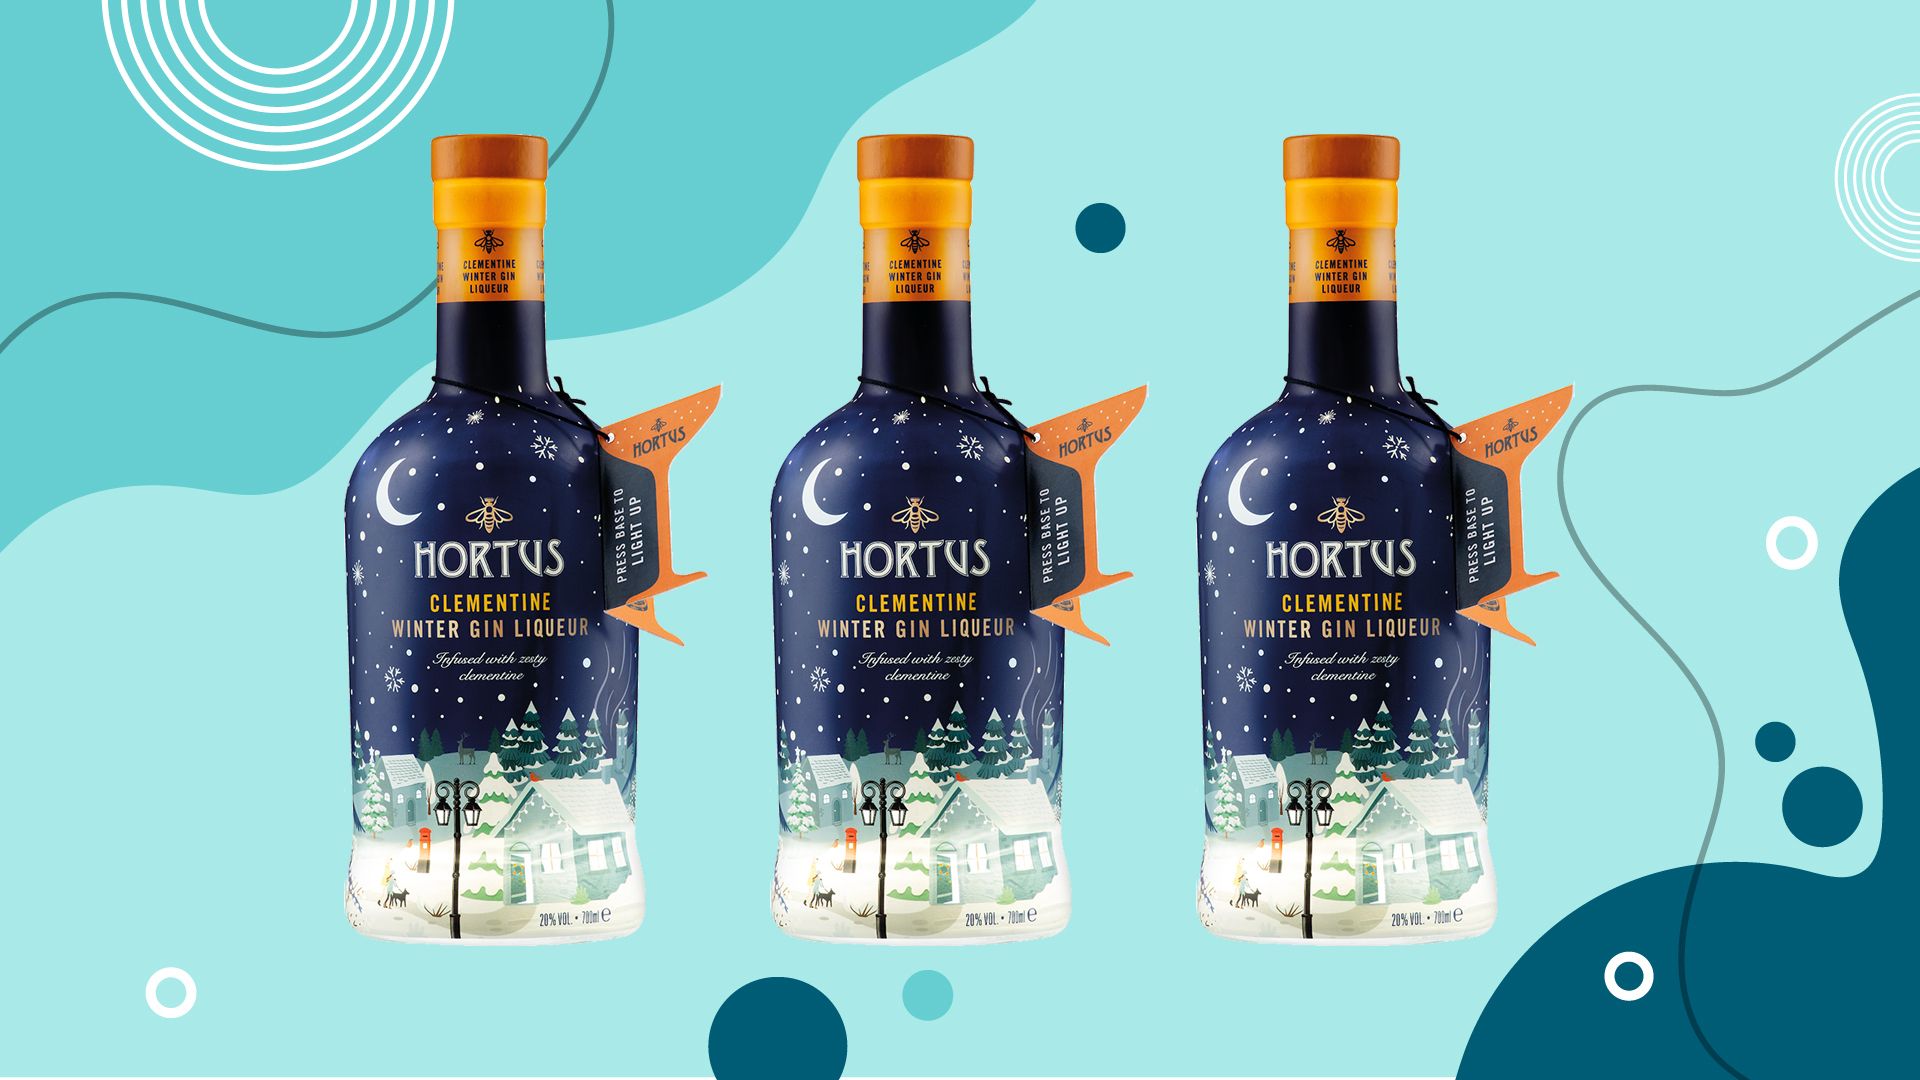 Christmas Launches A Light-Up For Gin Lidl